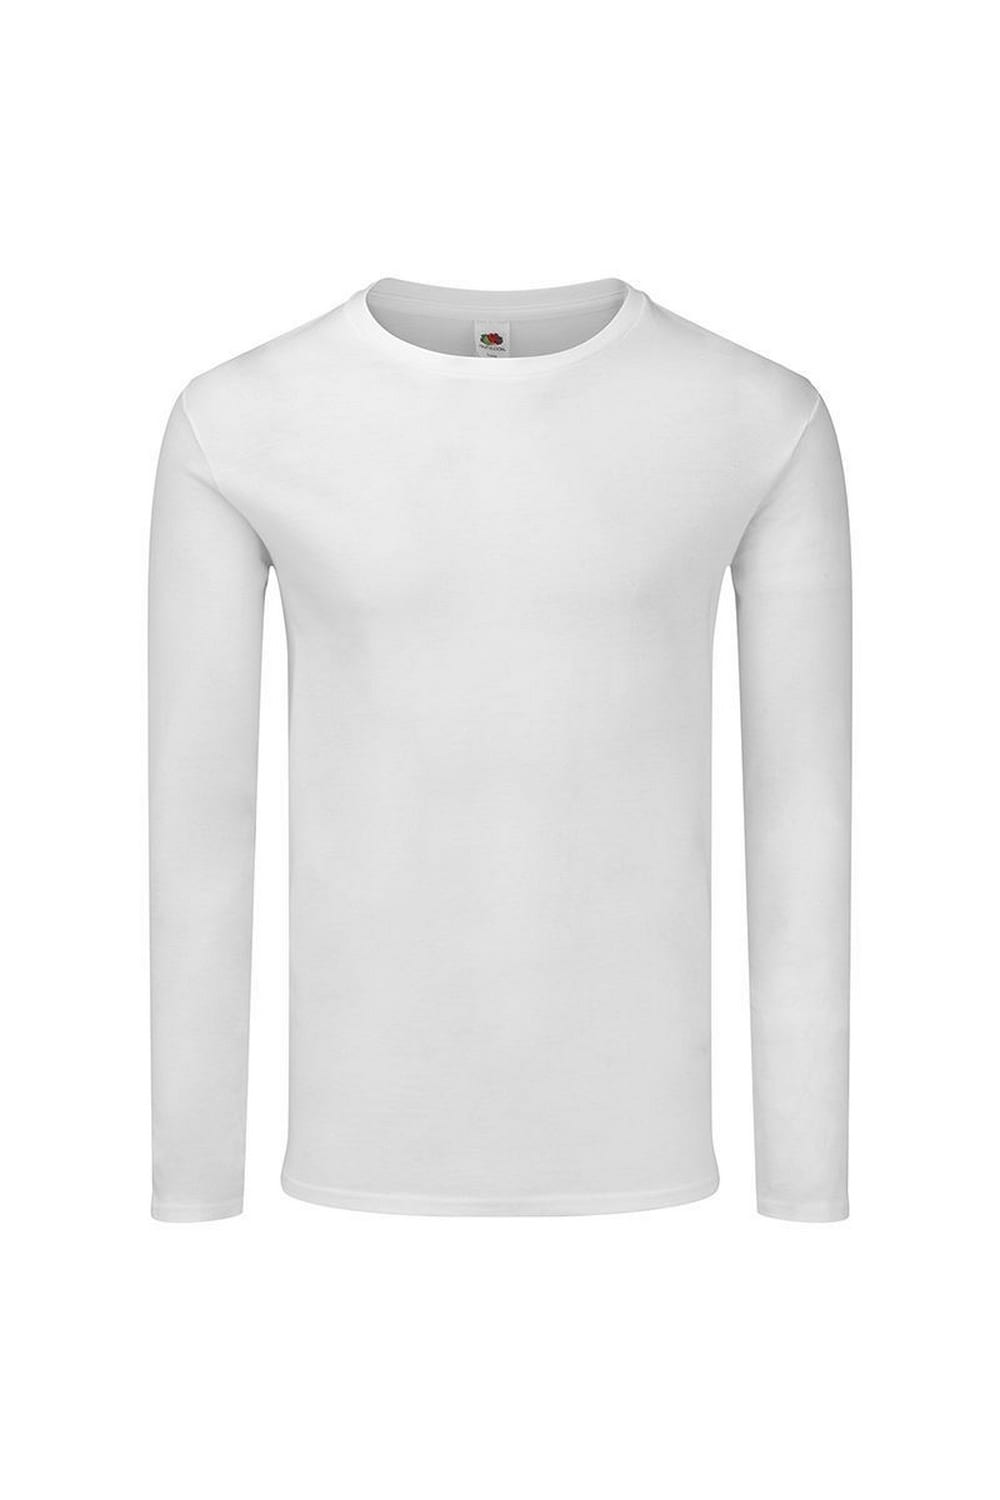 Fruit Of The Loom Mens Iconic 150 Long-Sleeved T-Shirt